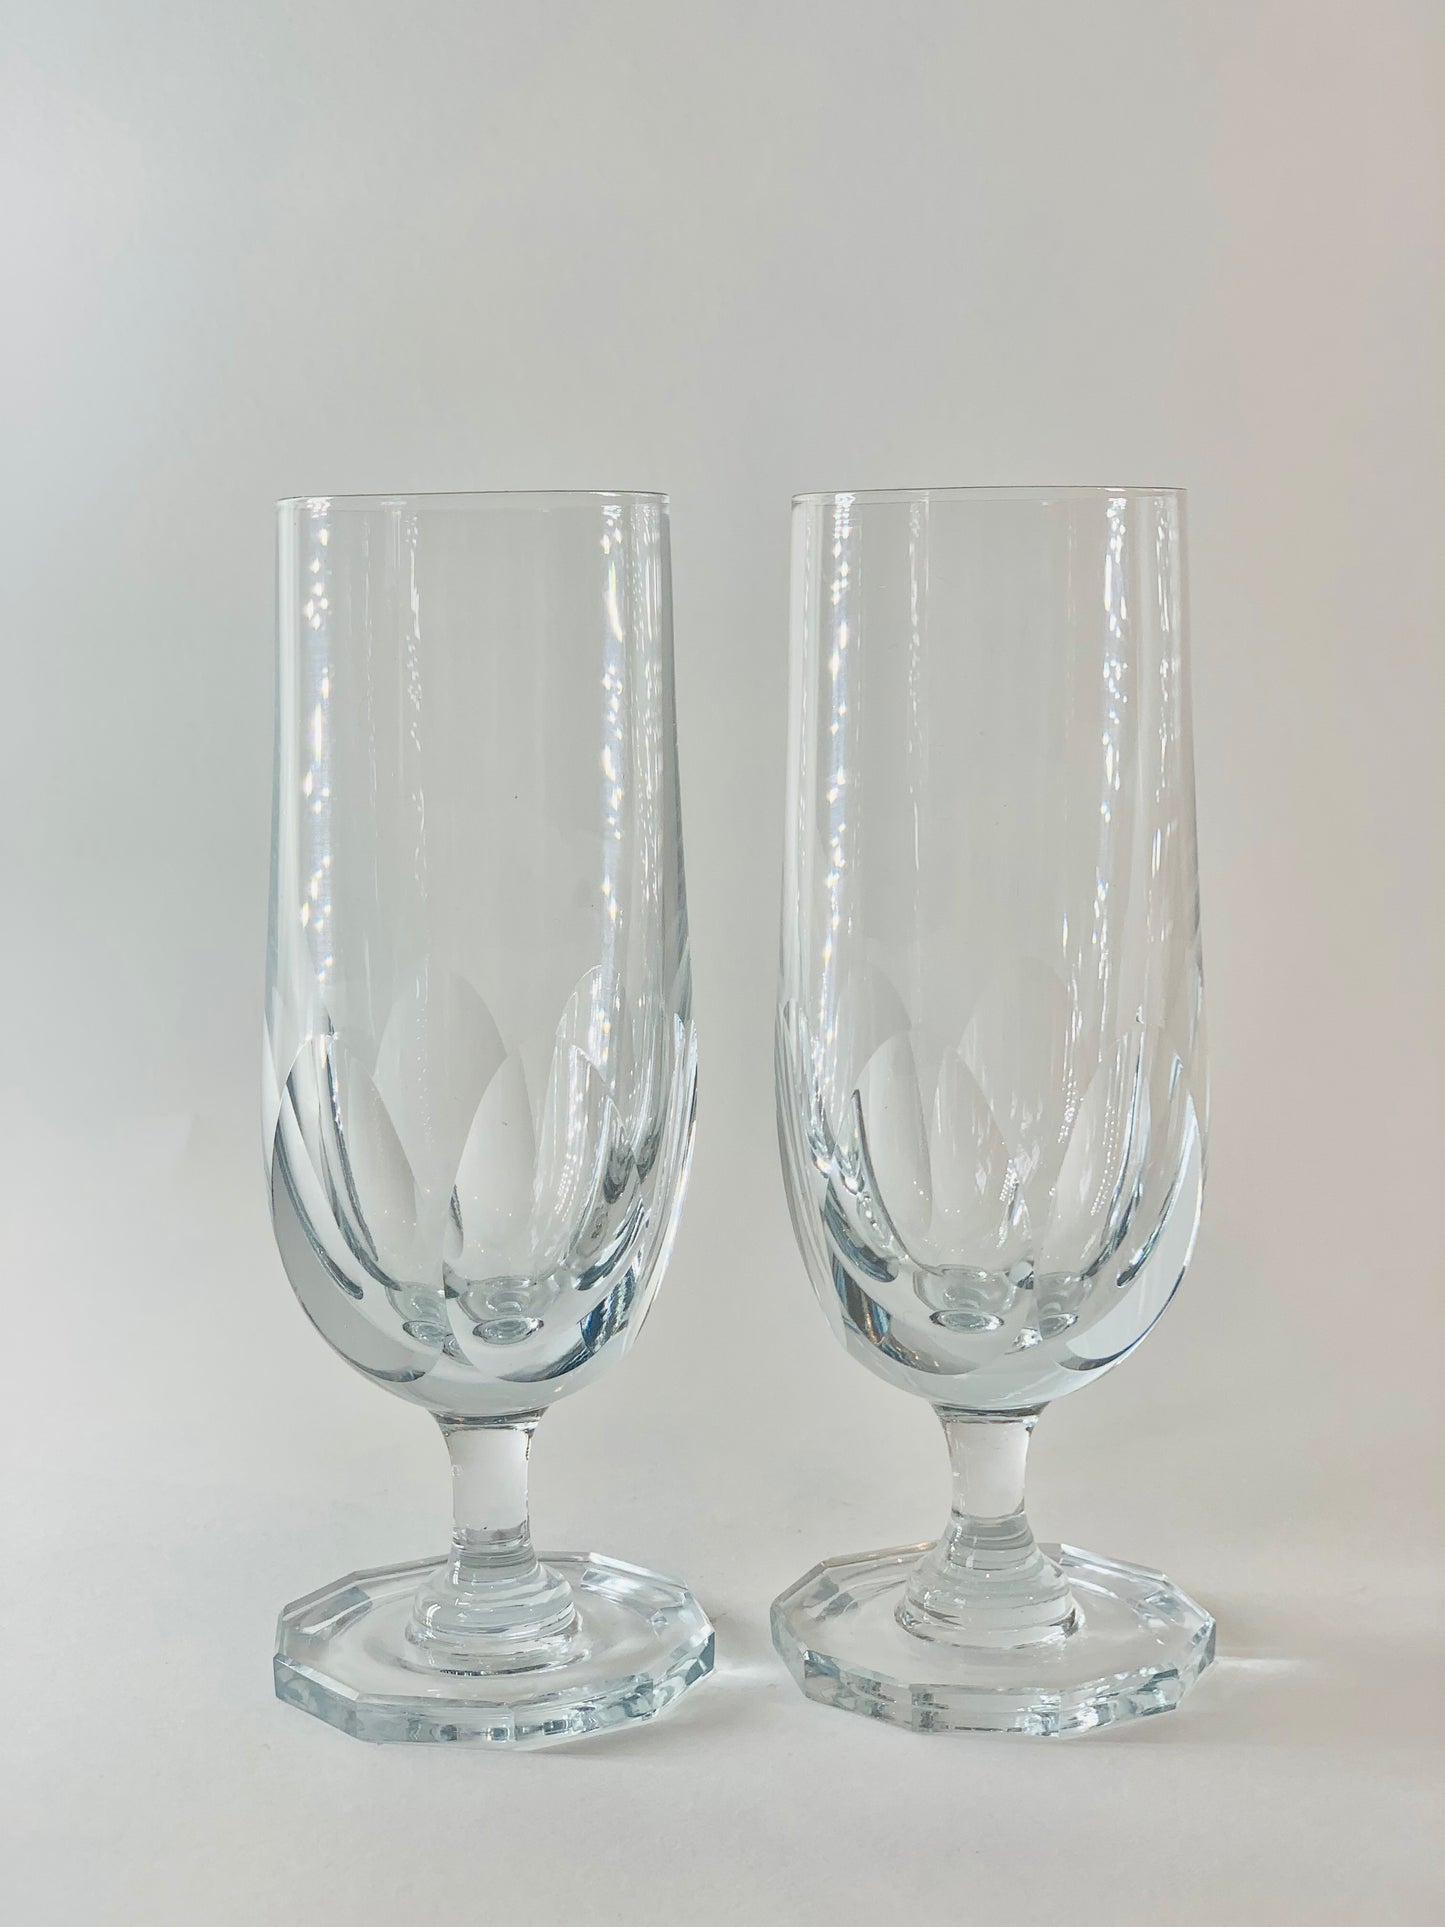 Vintage French cut crystal champagne flutes with matching base